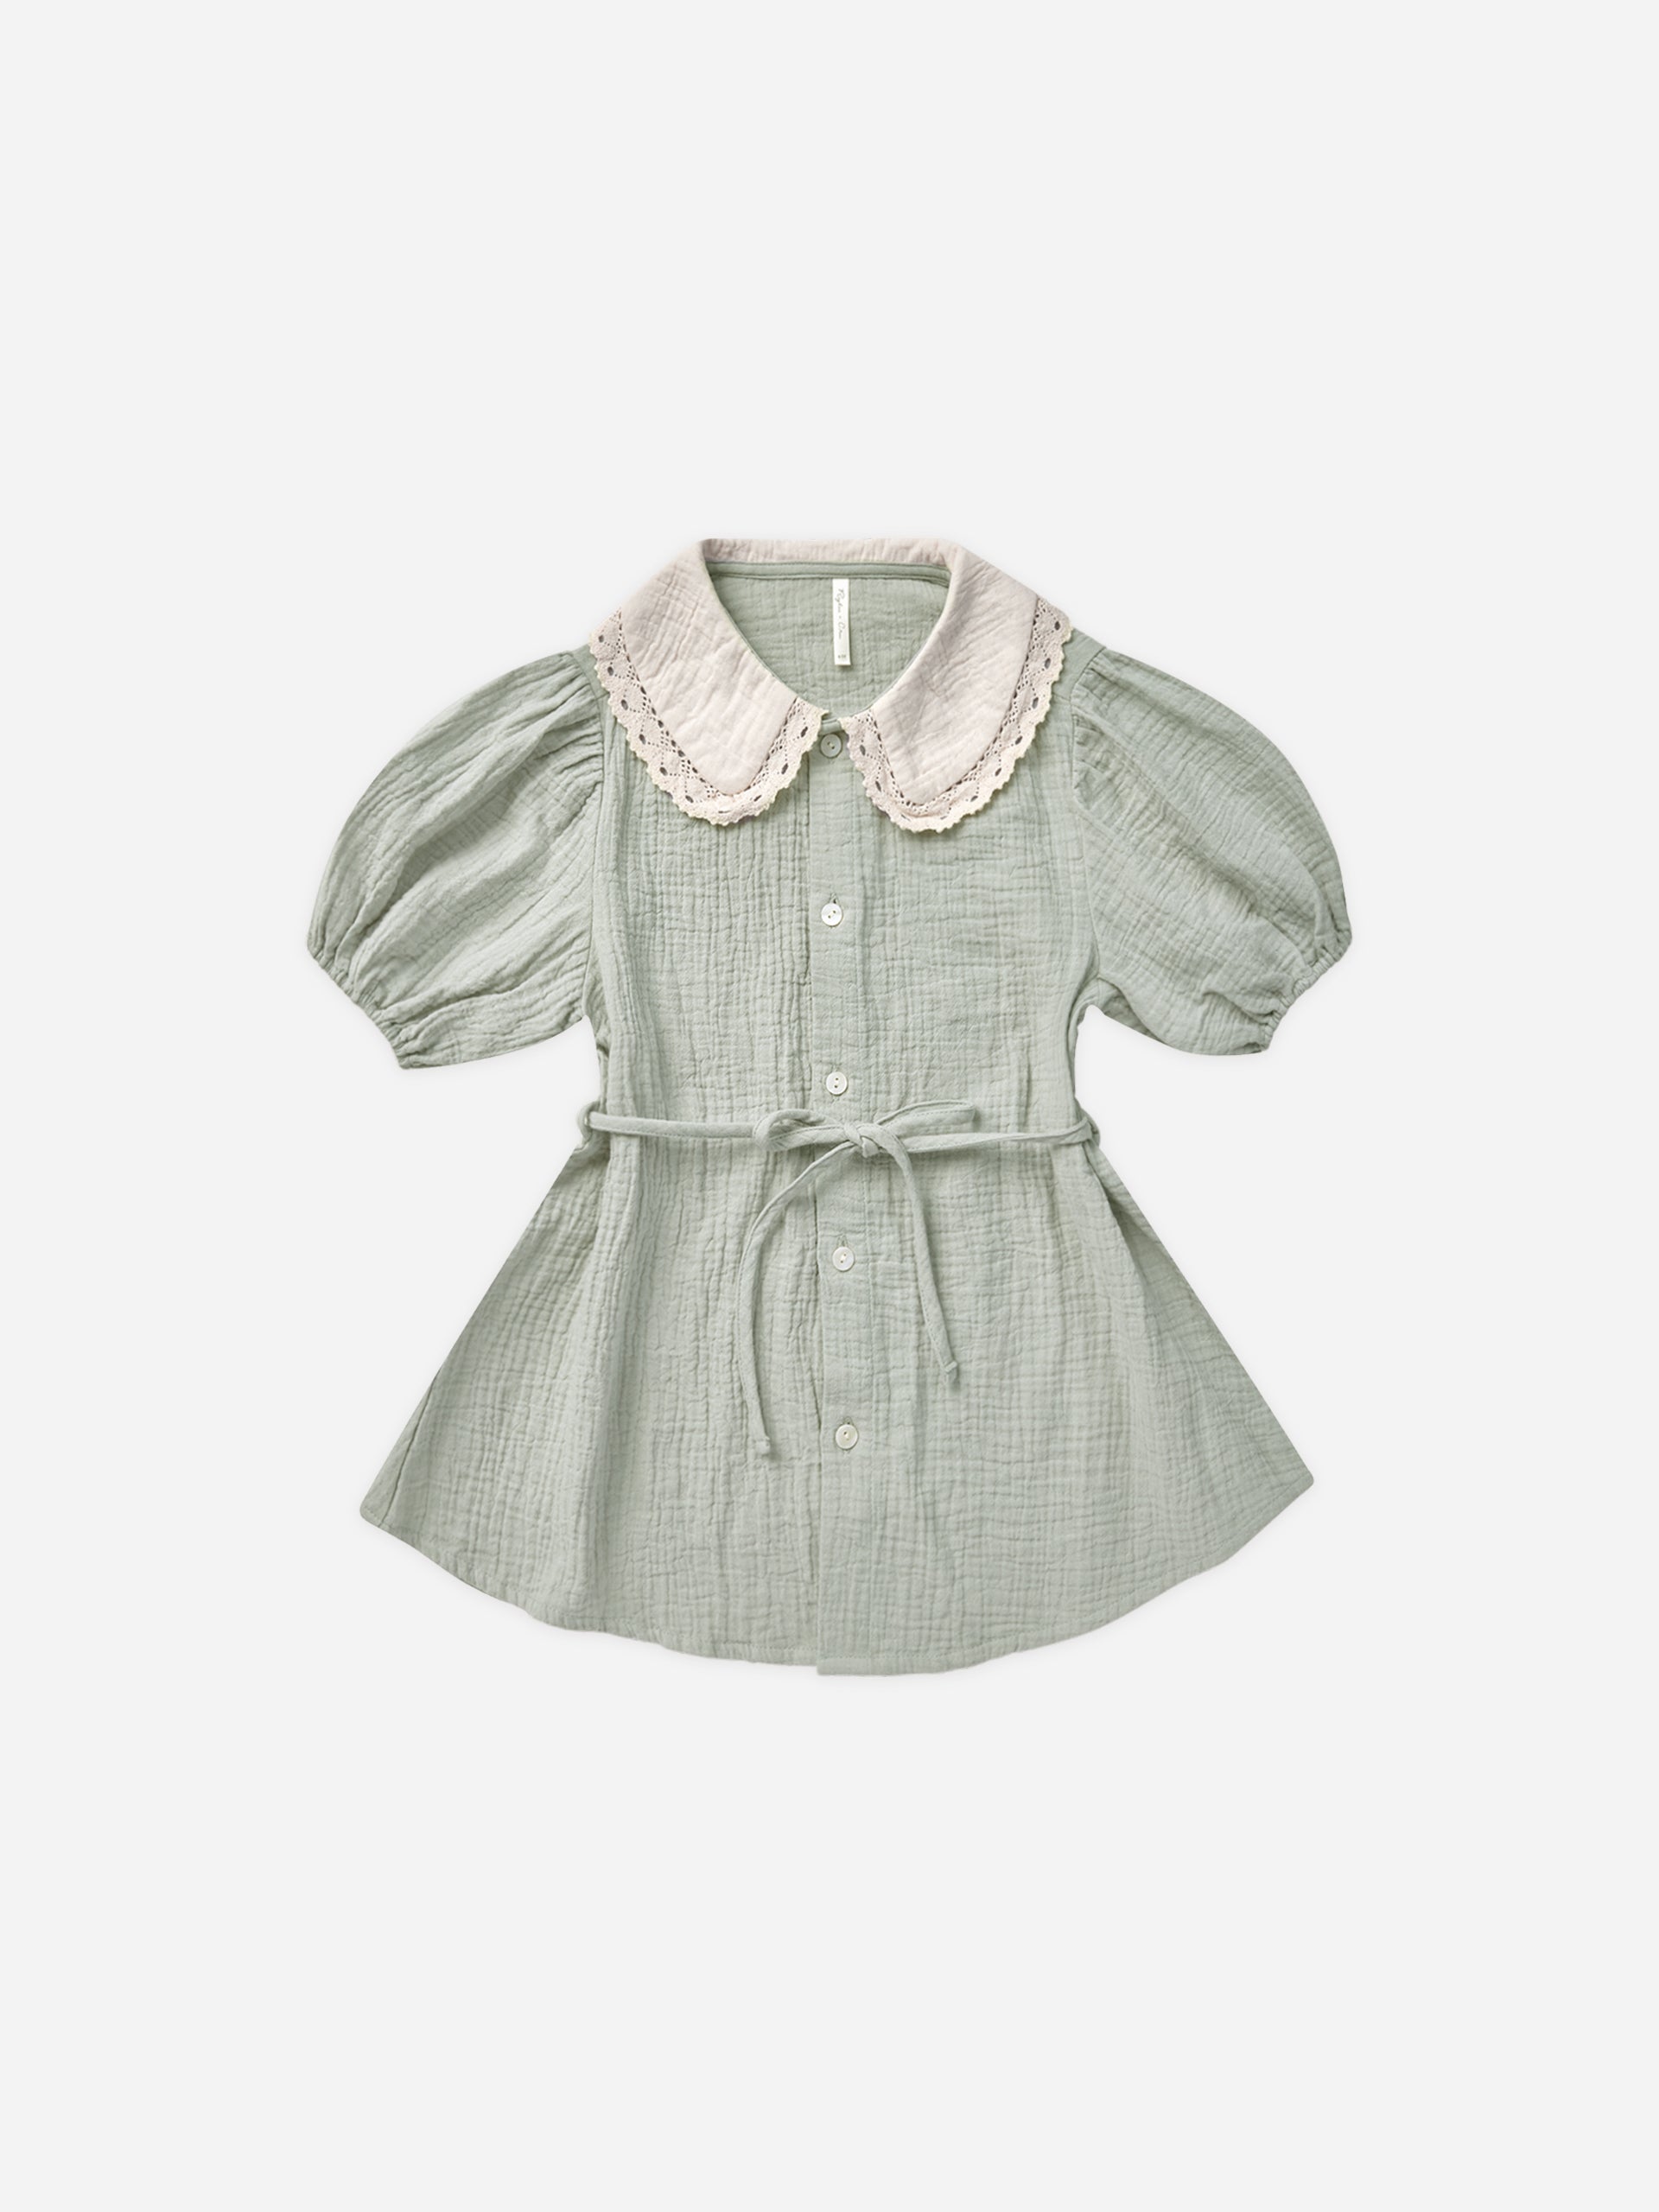 Olive Dress || Seafoam - Rylee + Cru | Kids Clothes | Trendy Baby Clothes | Modern Infant Outfits |